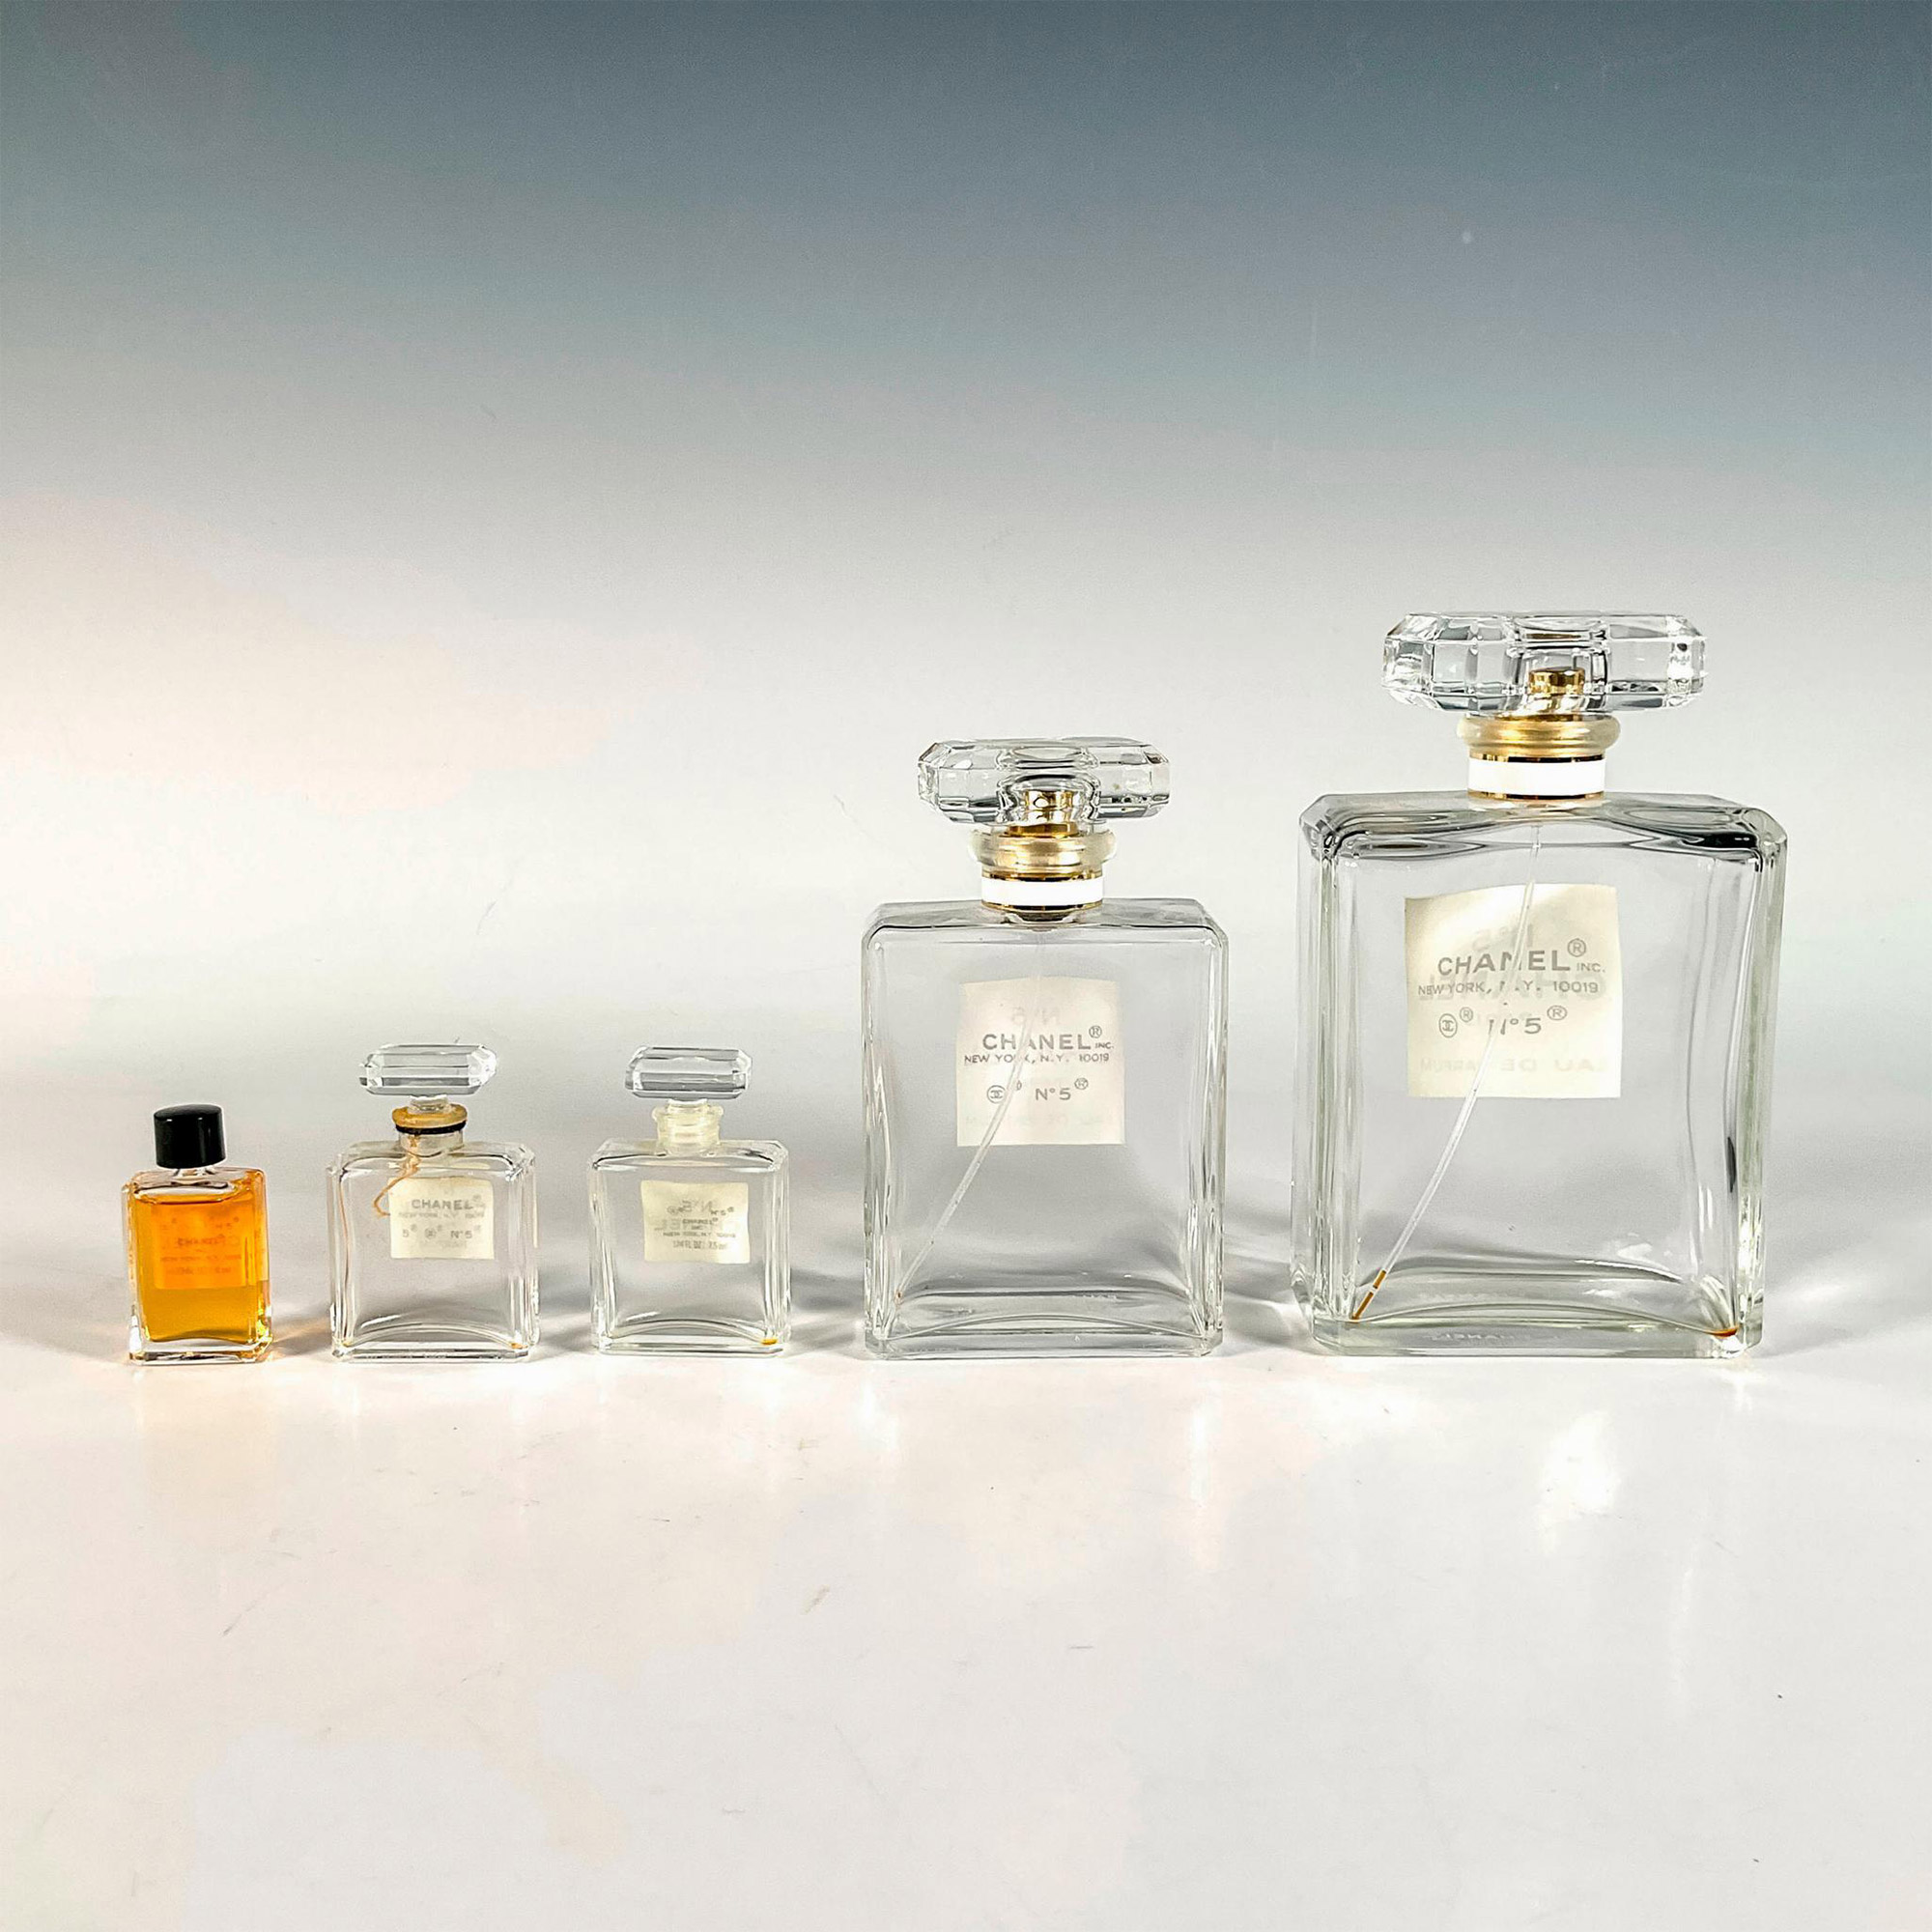 5pc Chanel No. 5 perfume bottles - Image 2 of 2